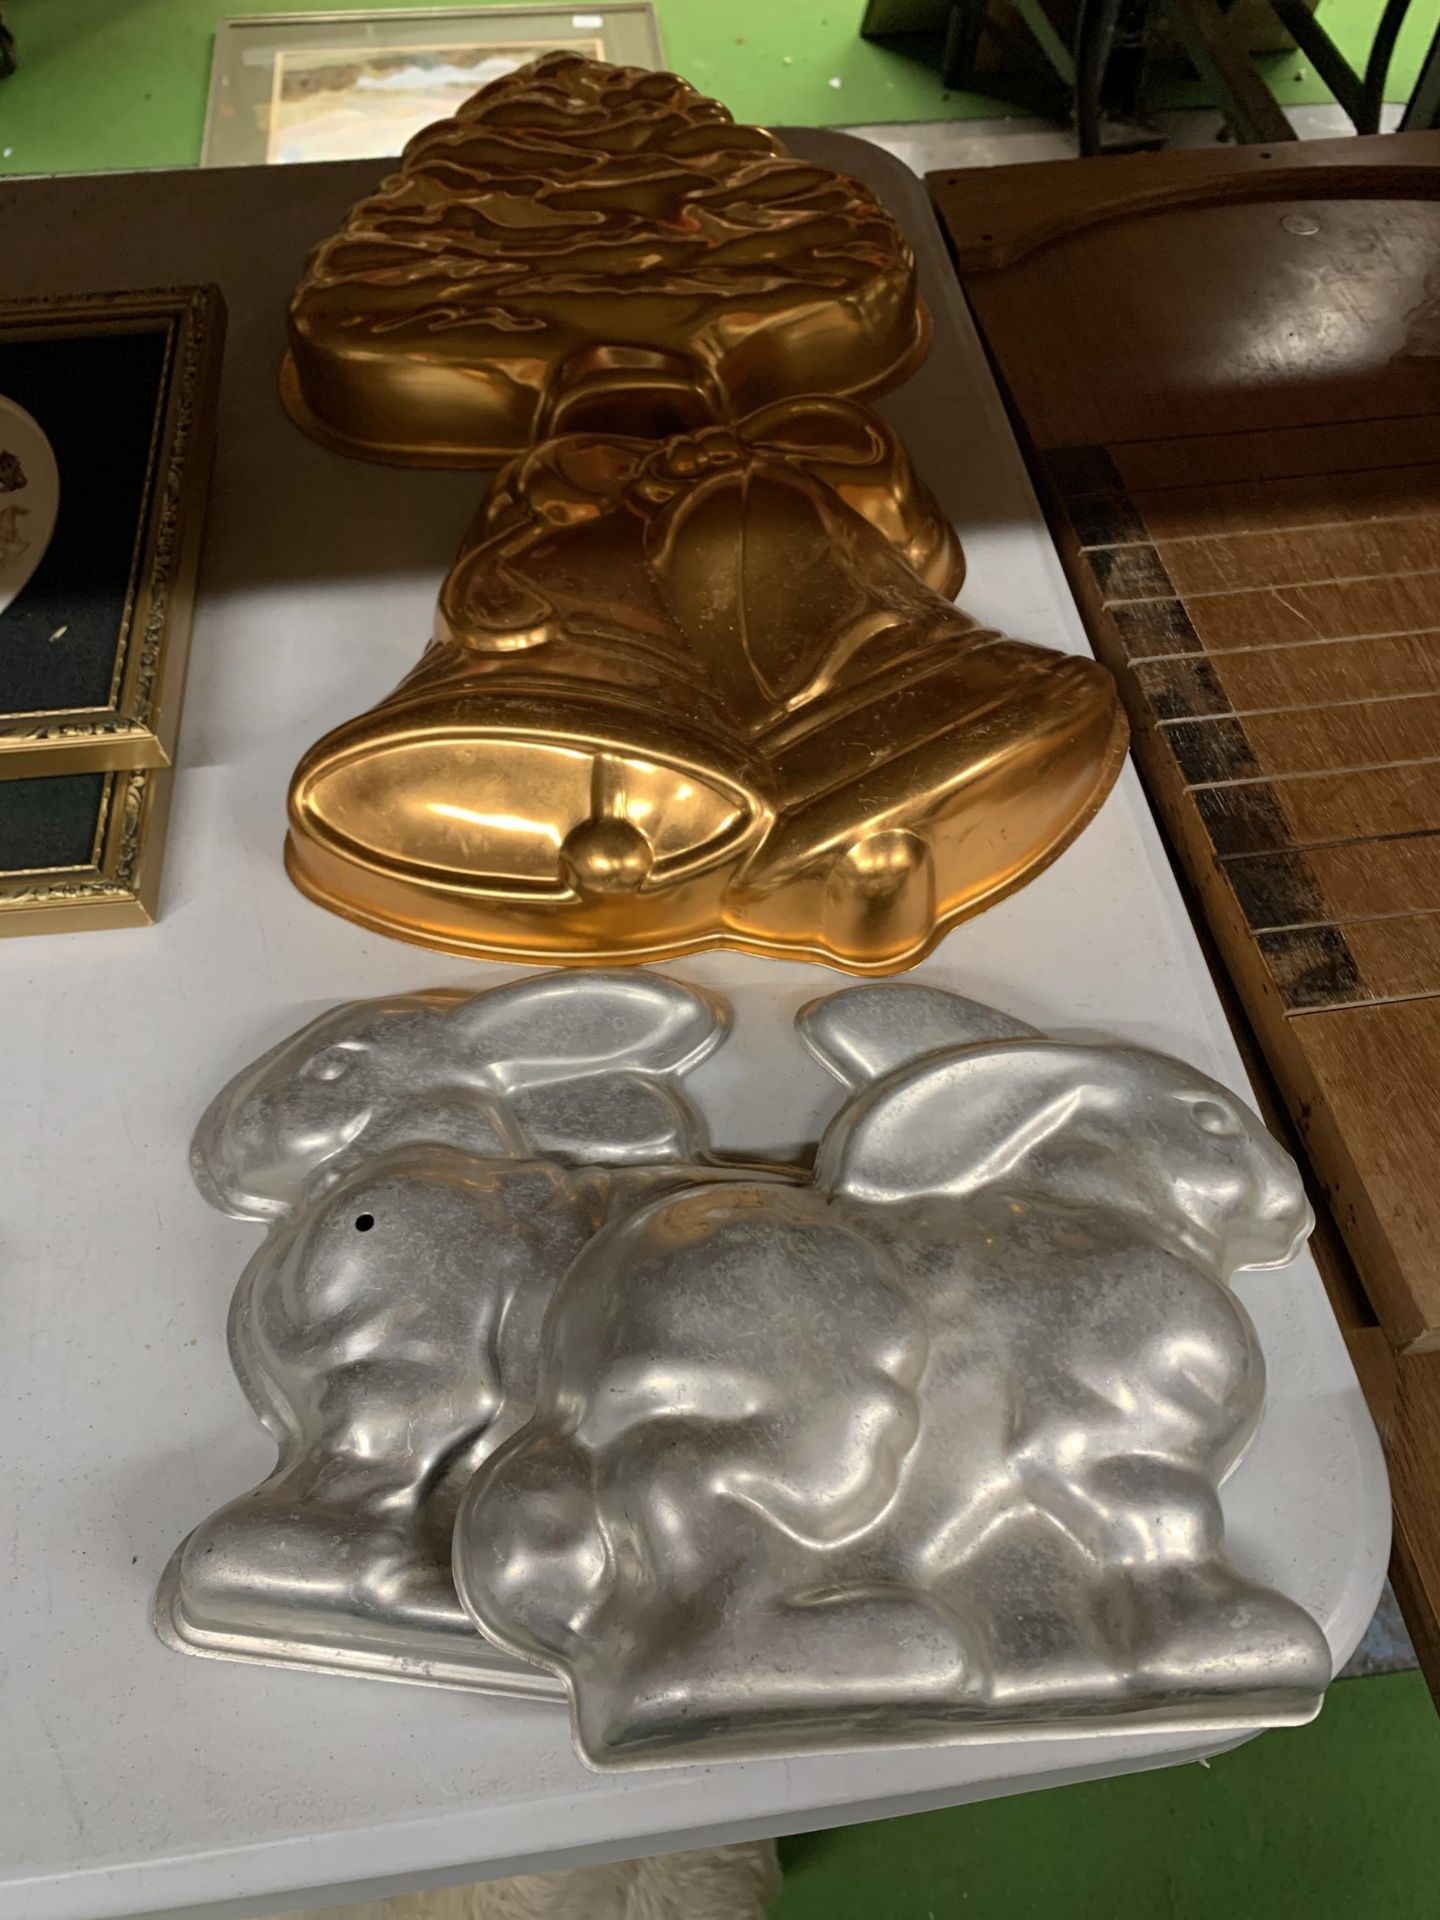 FOUR VINTAGE STYLE MOULDS, TWO TIN RABBITS AND TWO COPPER